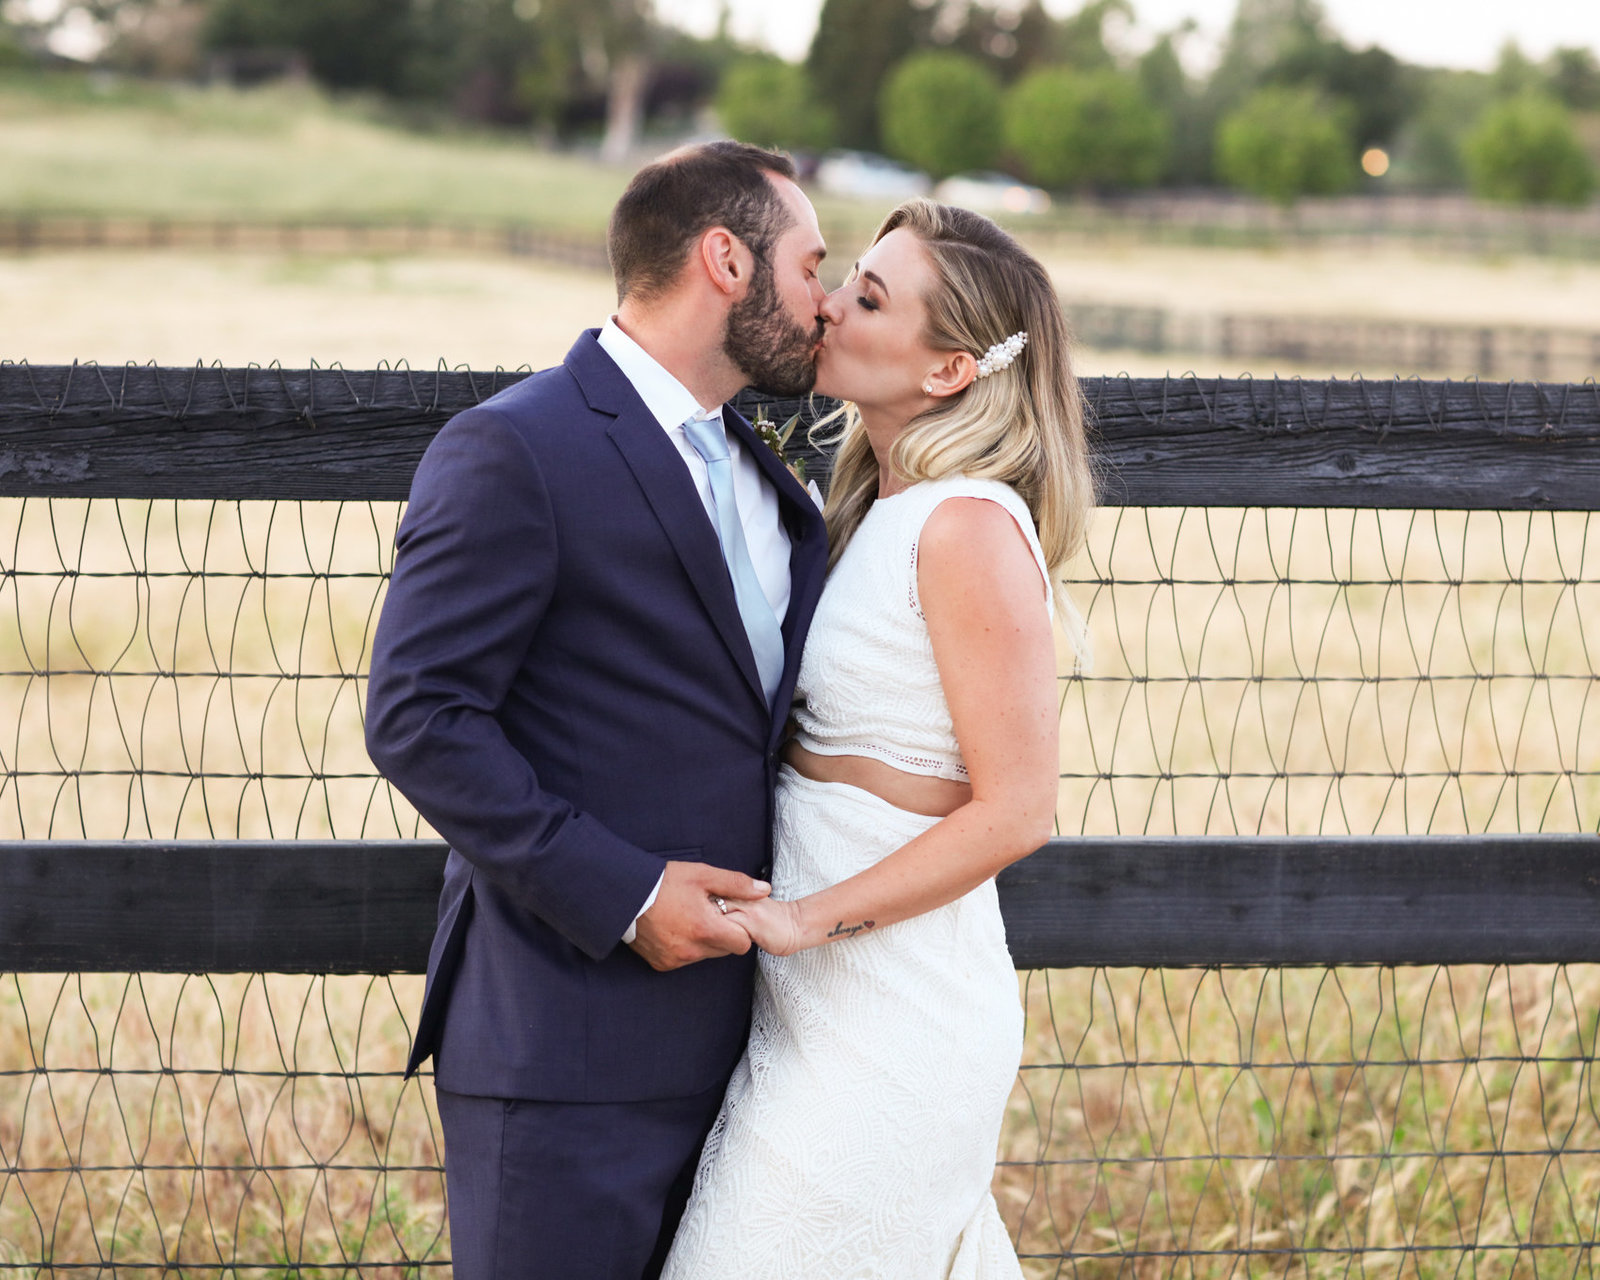 Bride and groom kiss, beautiful wedding in a rustic setting